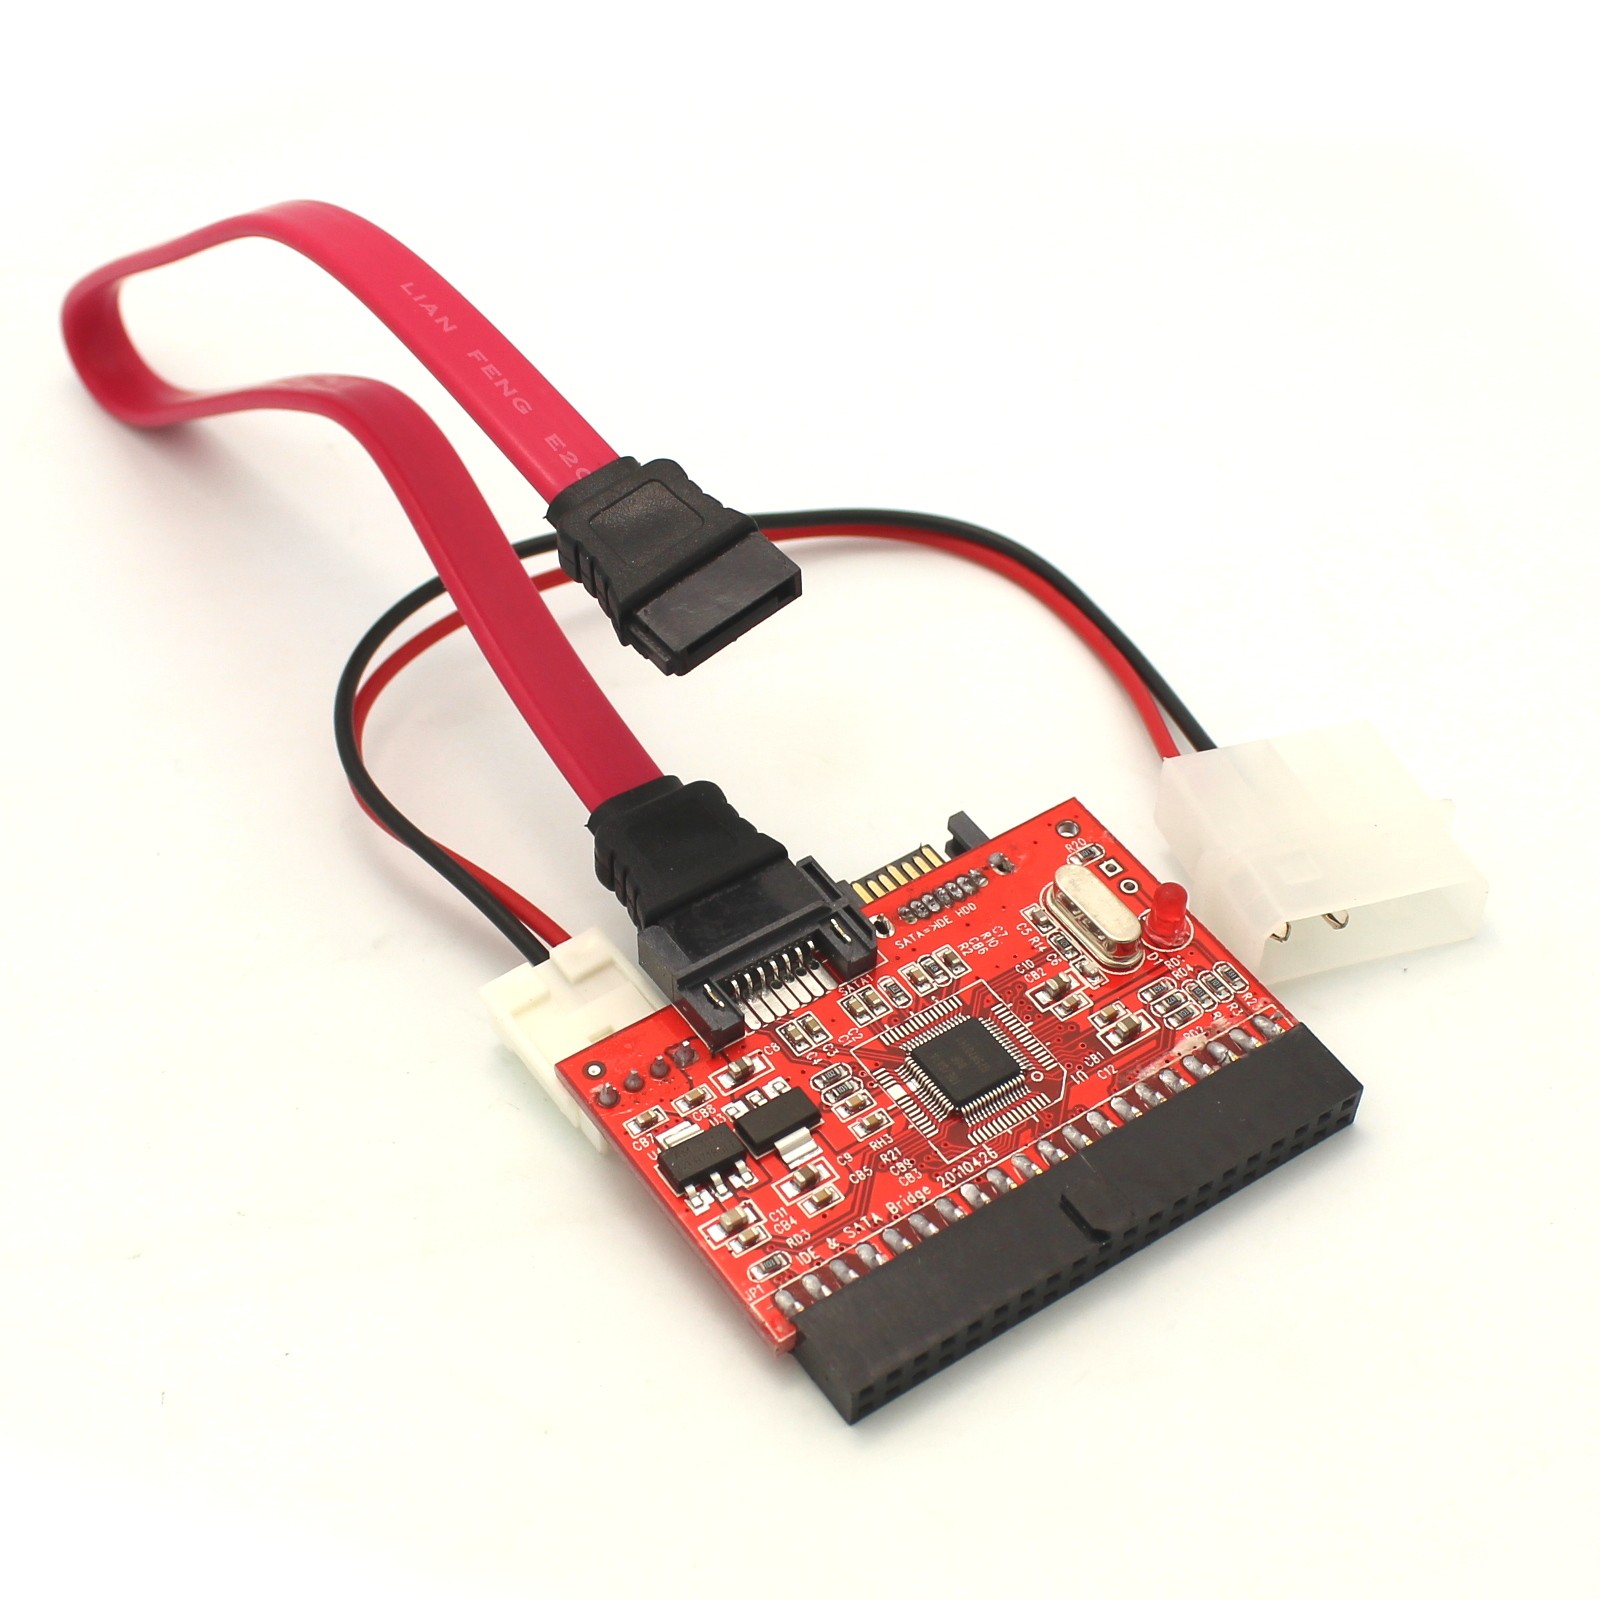 $5.99 - SATA to IDE Adapter - Tinkersphere